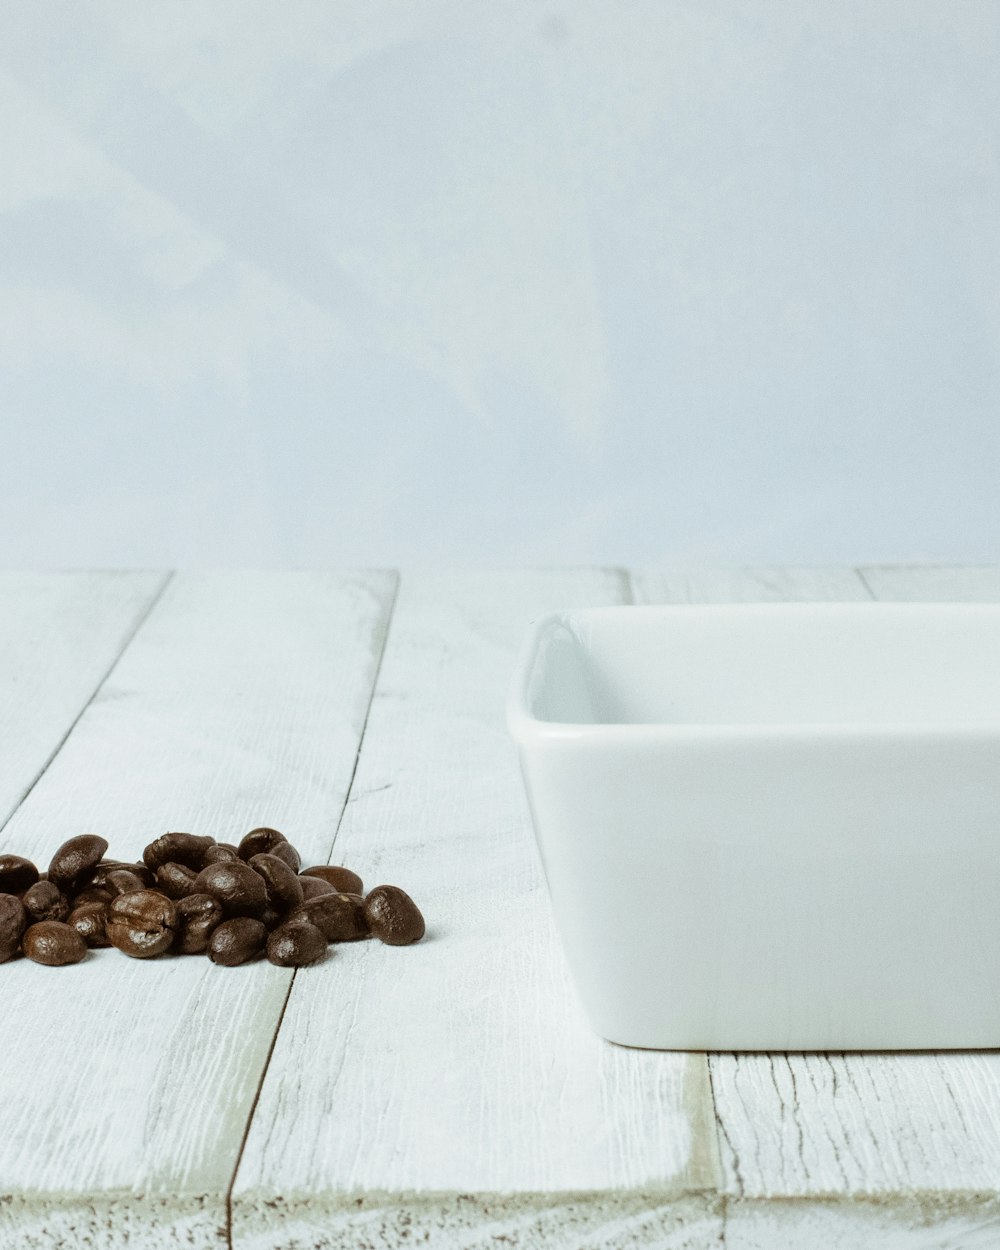 brown coffee beans on white plastic container